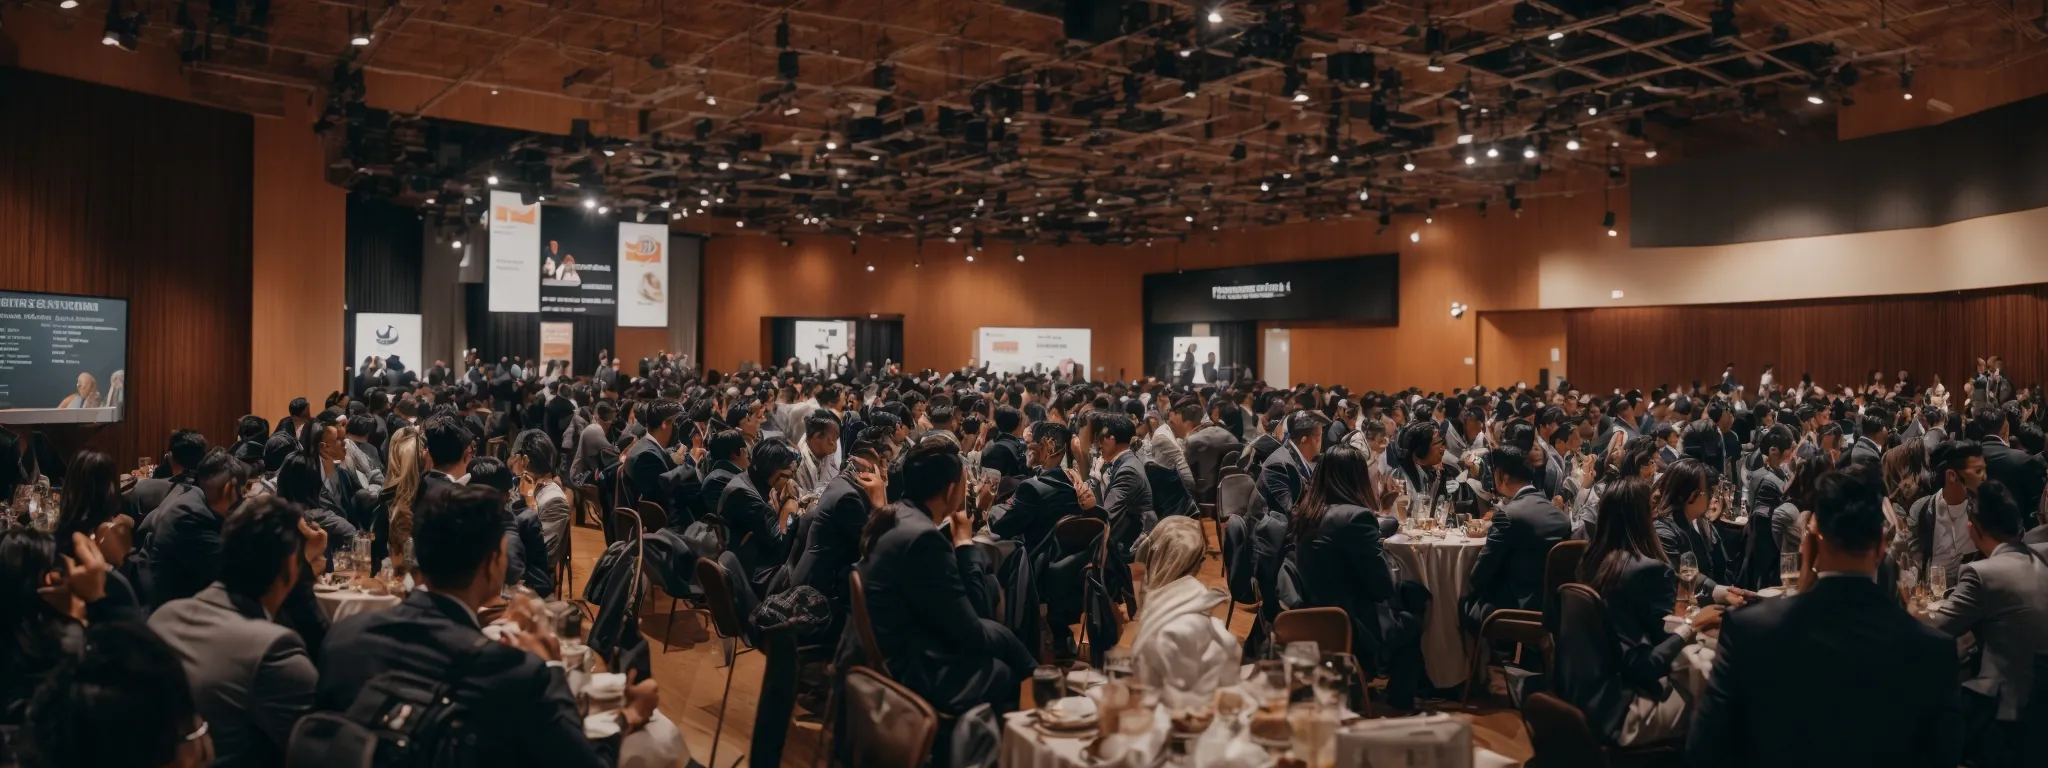 a bustling digital marketing conference with professionals networking and discussing strategies around social media, email campaigns, and influencer partnerships.